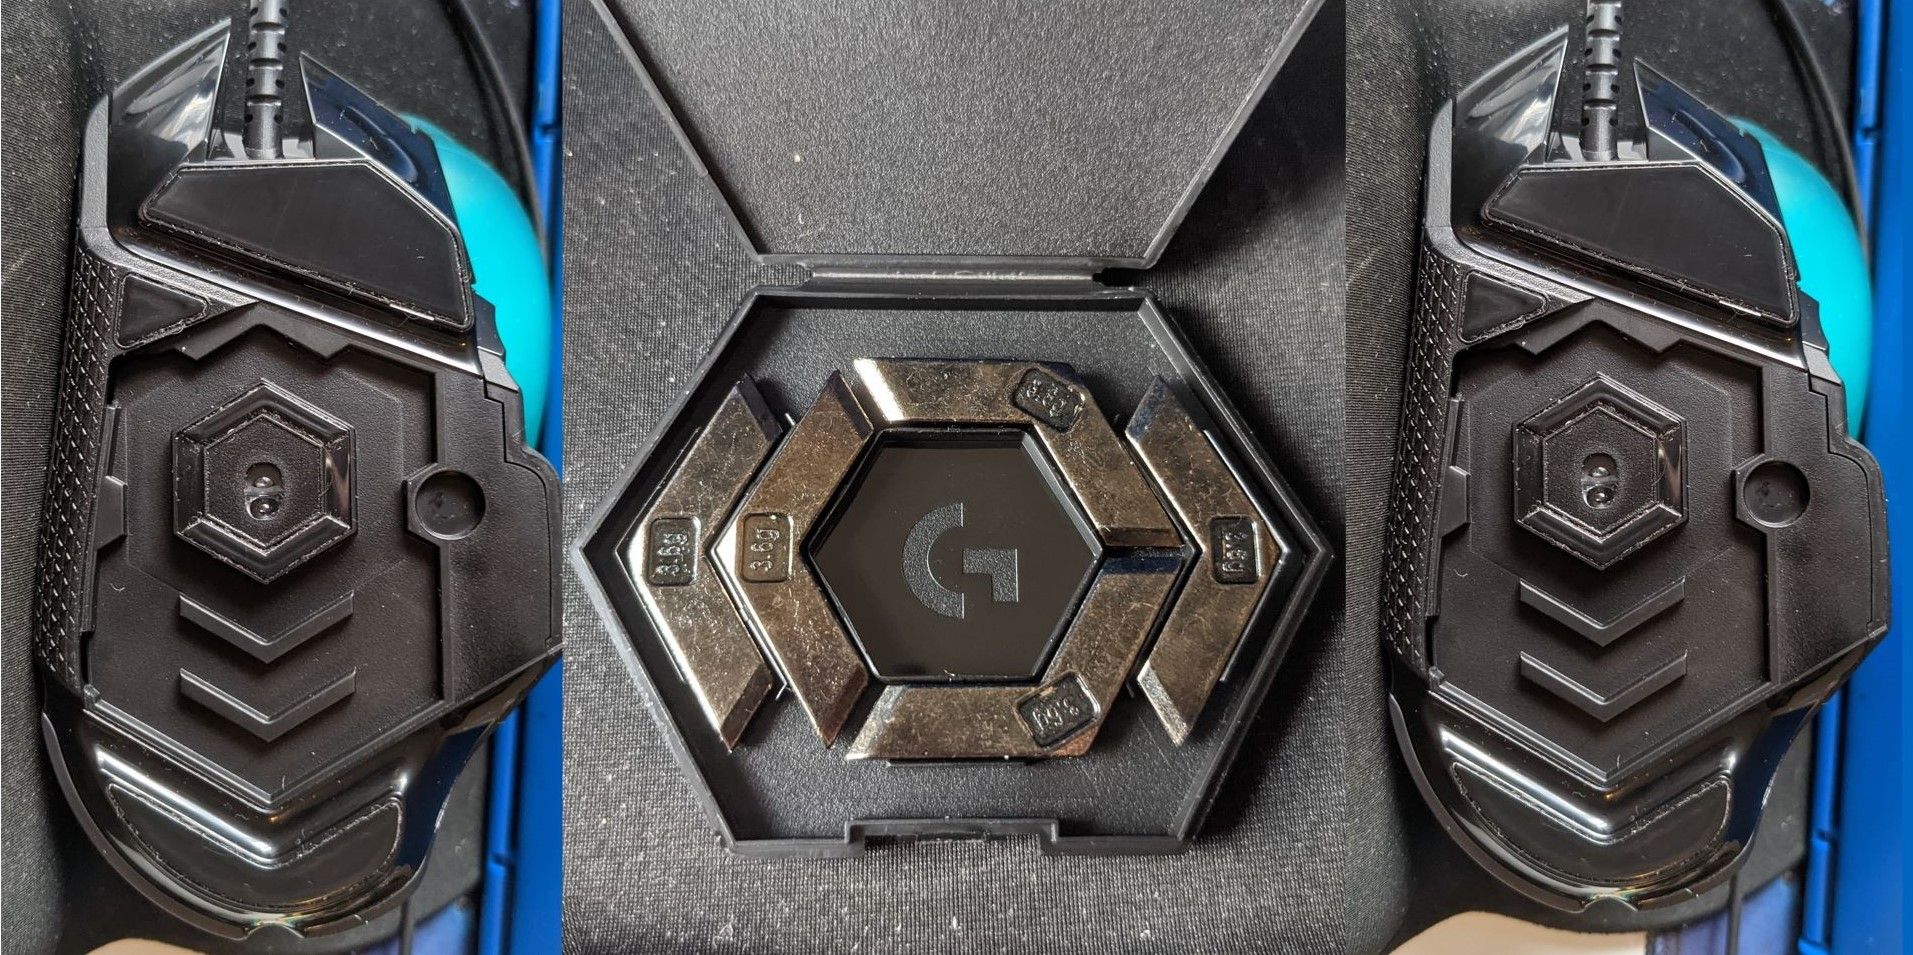 g502 mouse extra features